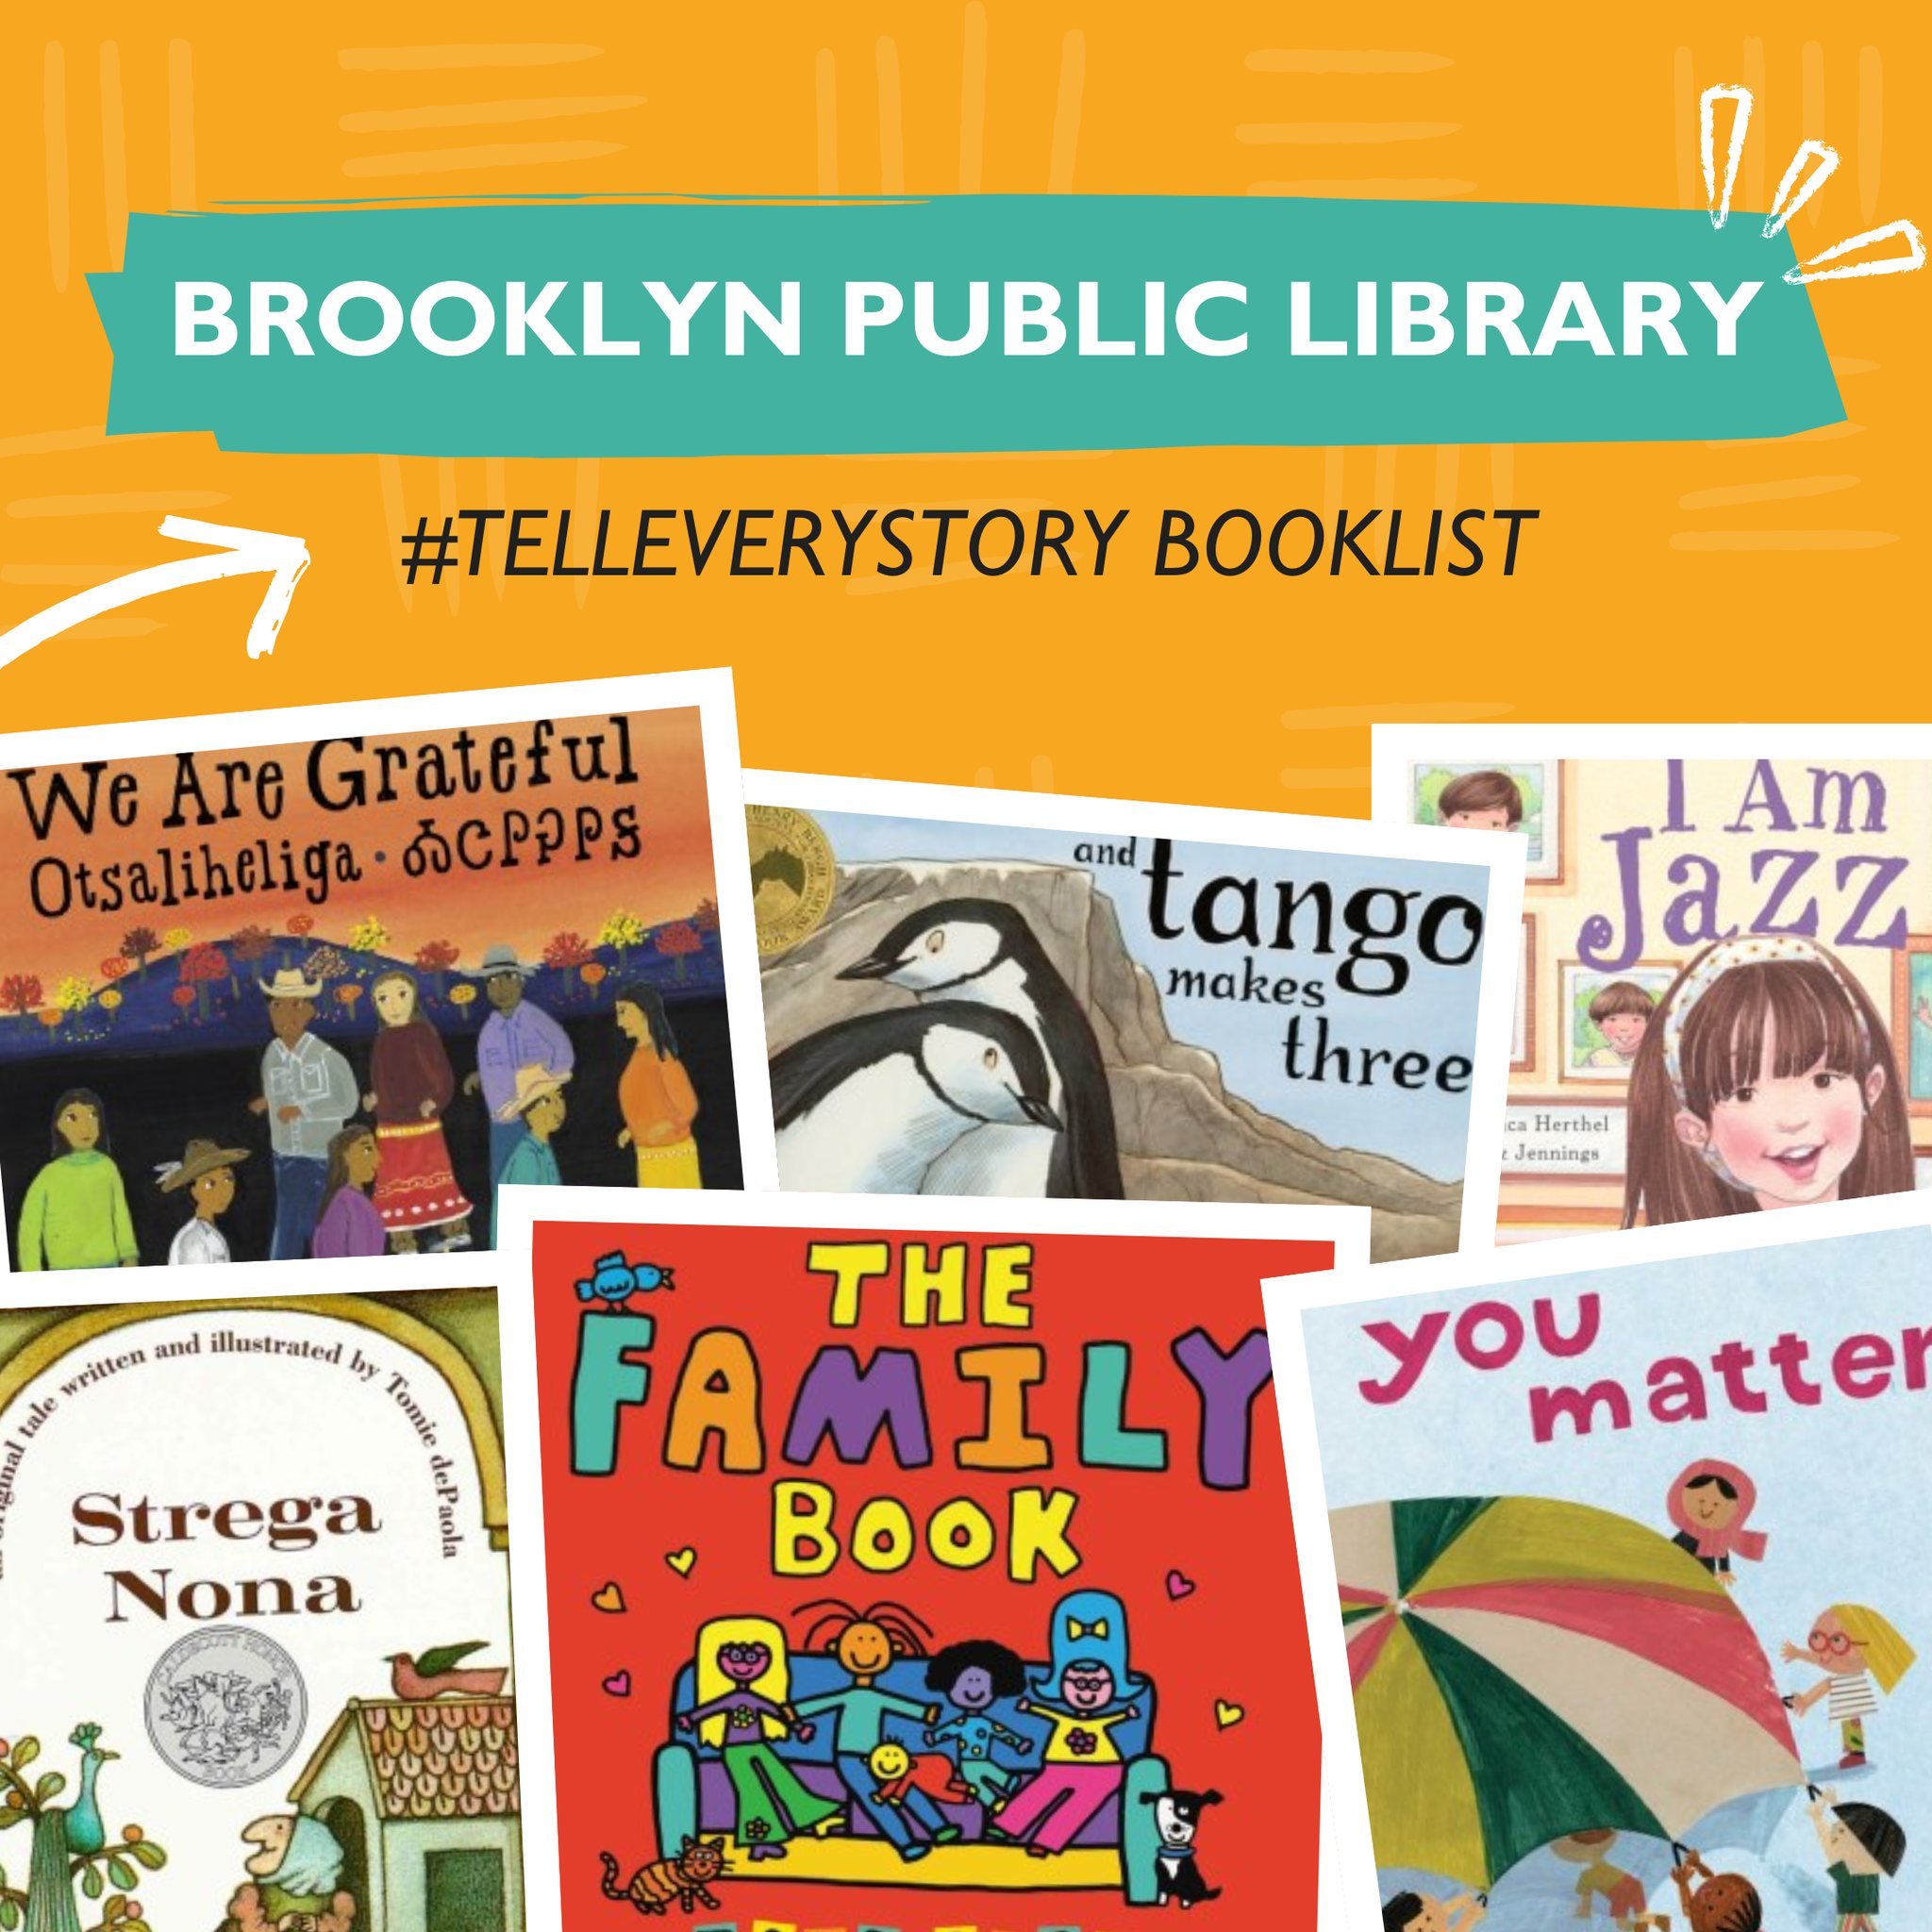 #WorldReadAloudDay may only happen once a year, but the joy of reading aloud is endless! Whether it's a bright day or a cozy night, there's something magical about opening a book, sharing a story, and reading out loud together. Our WRAD booklists are